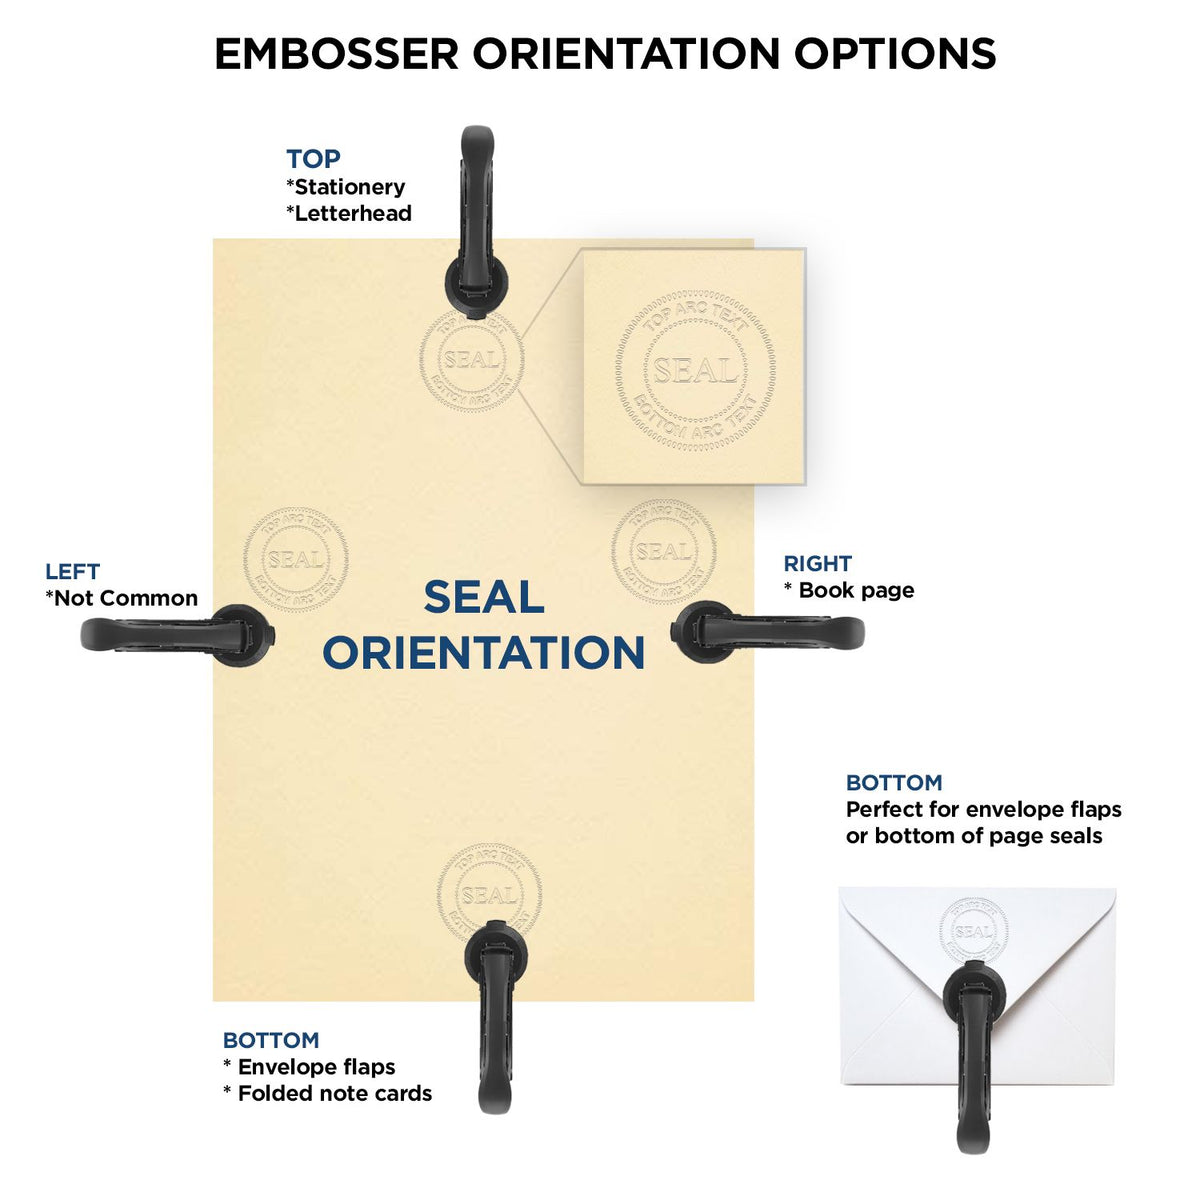 An infographic for the Texas Geologist Desk Seal showing embosser orientation, this is showing examples of a top, bottom, right and left insert.